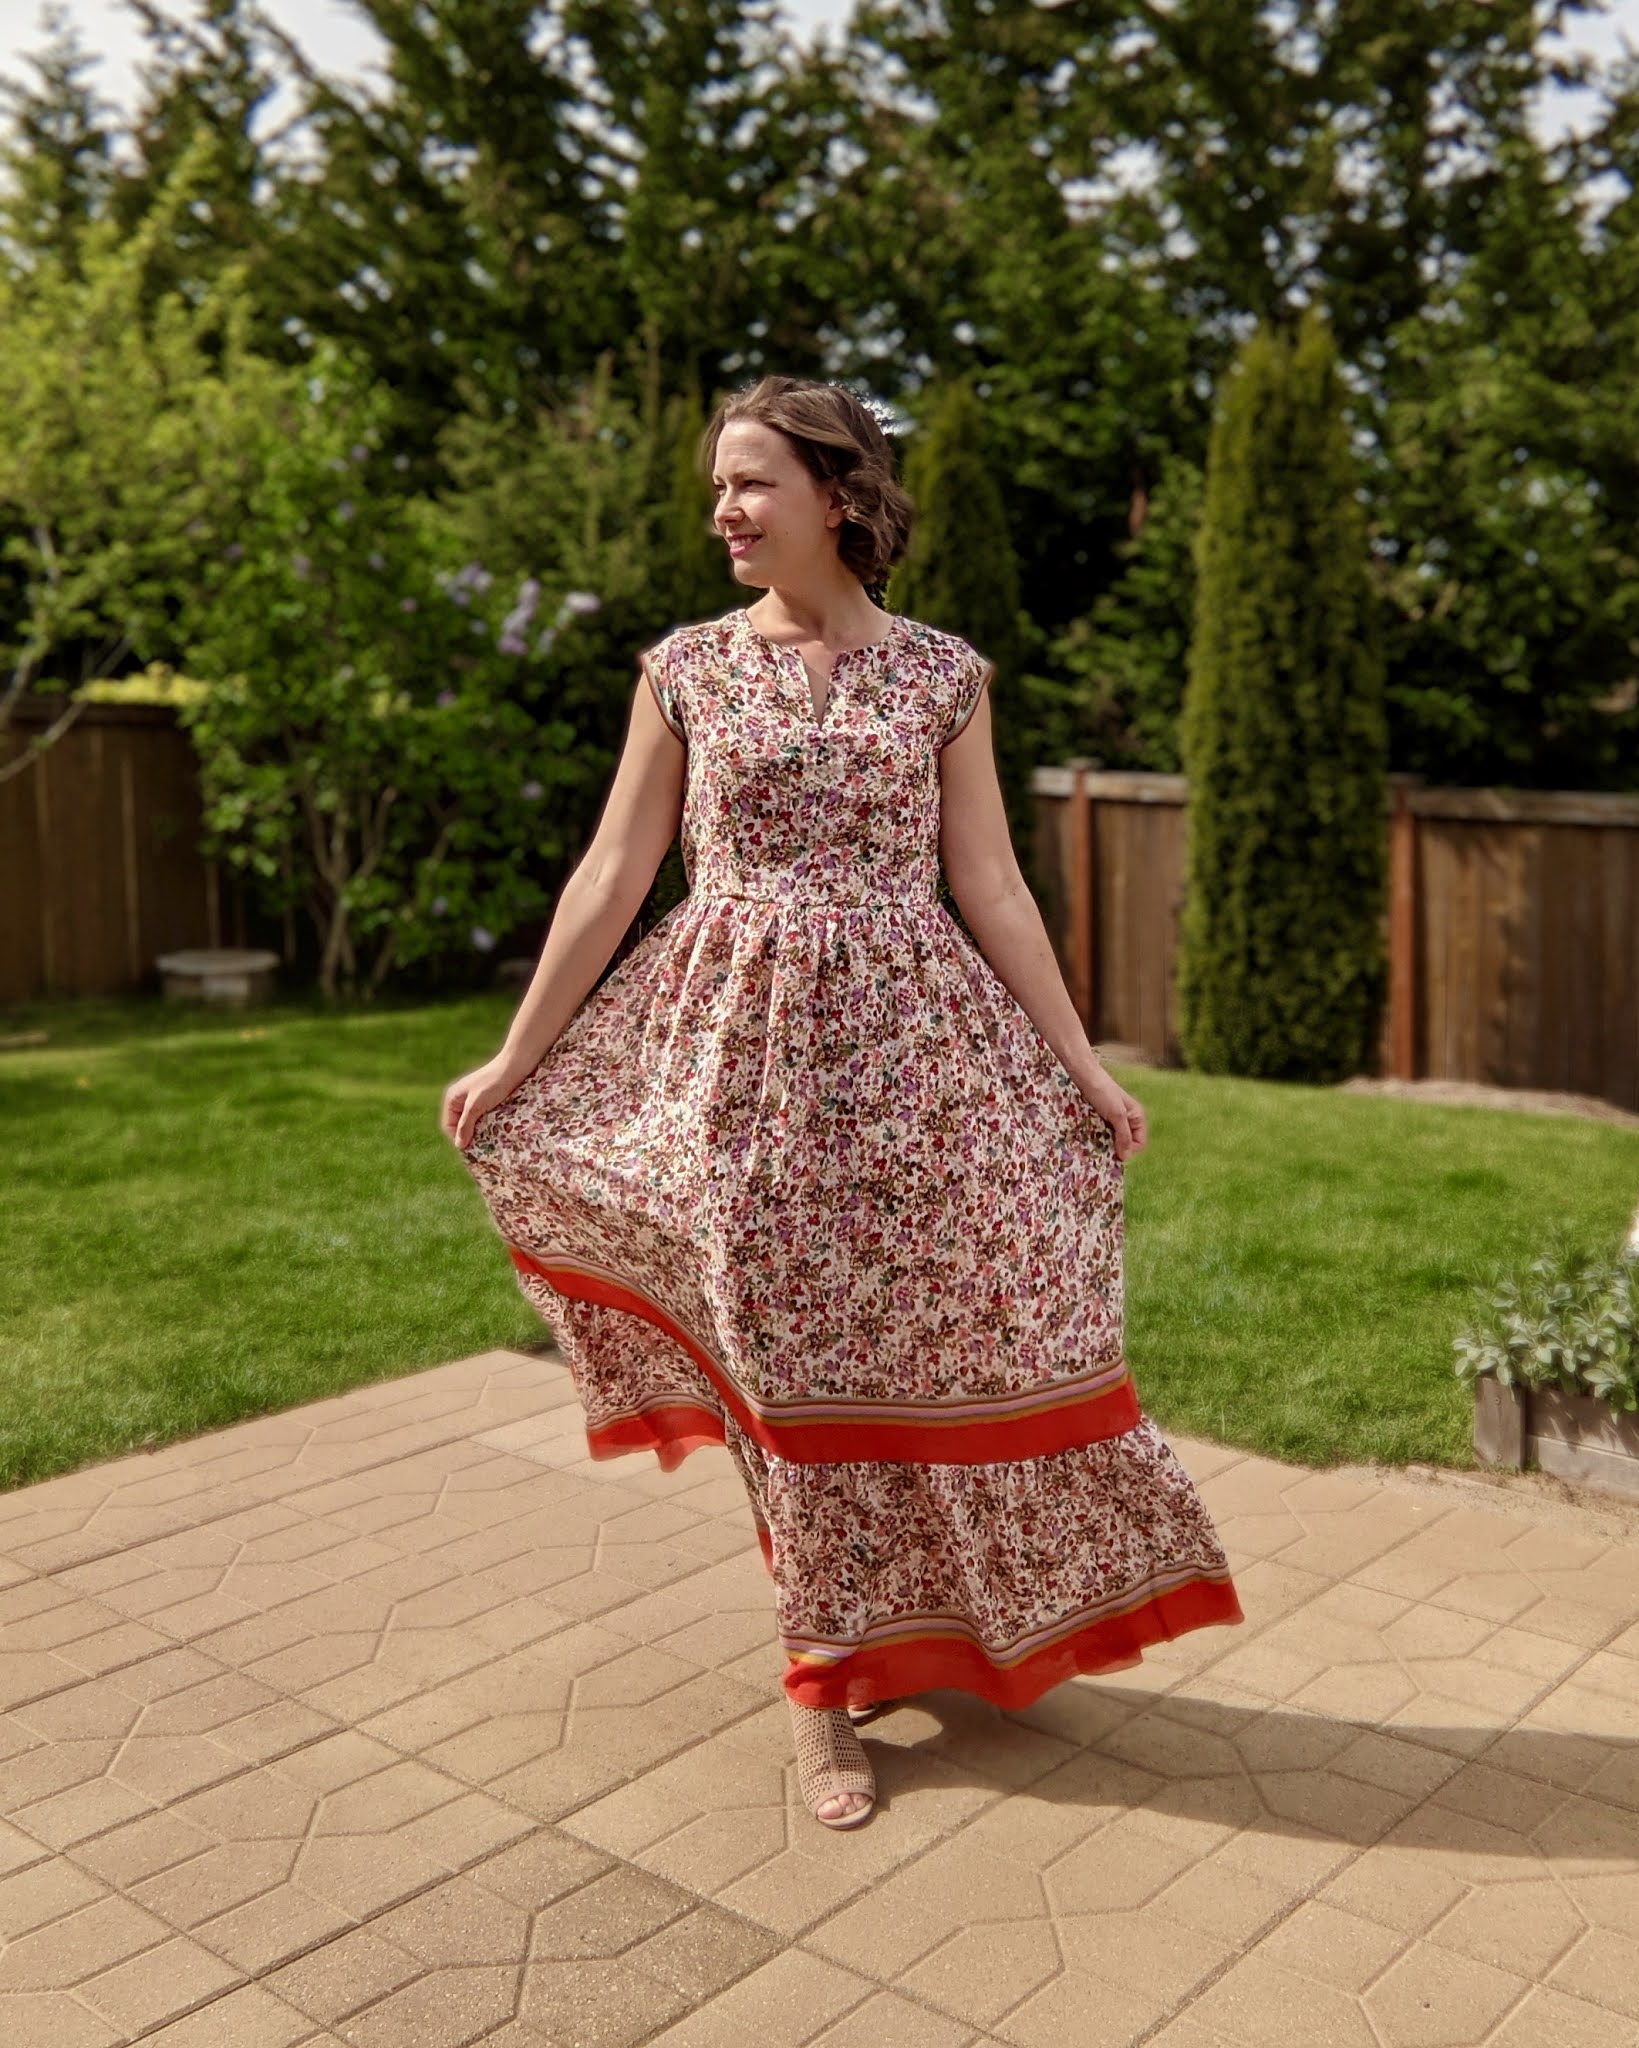 Made by a Fabricista: A Fruity Spring Dress